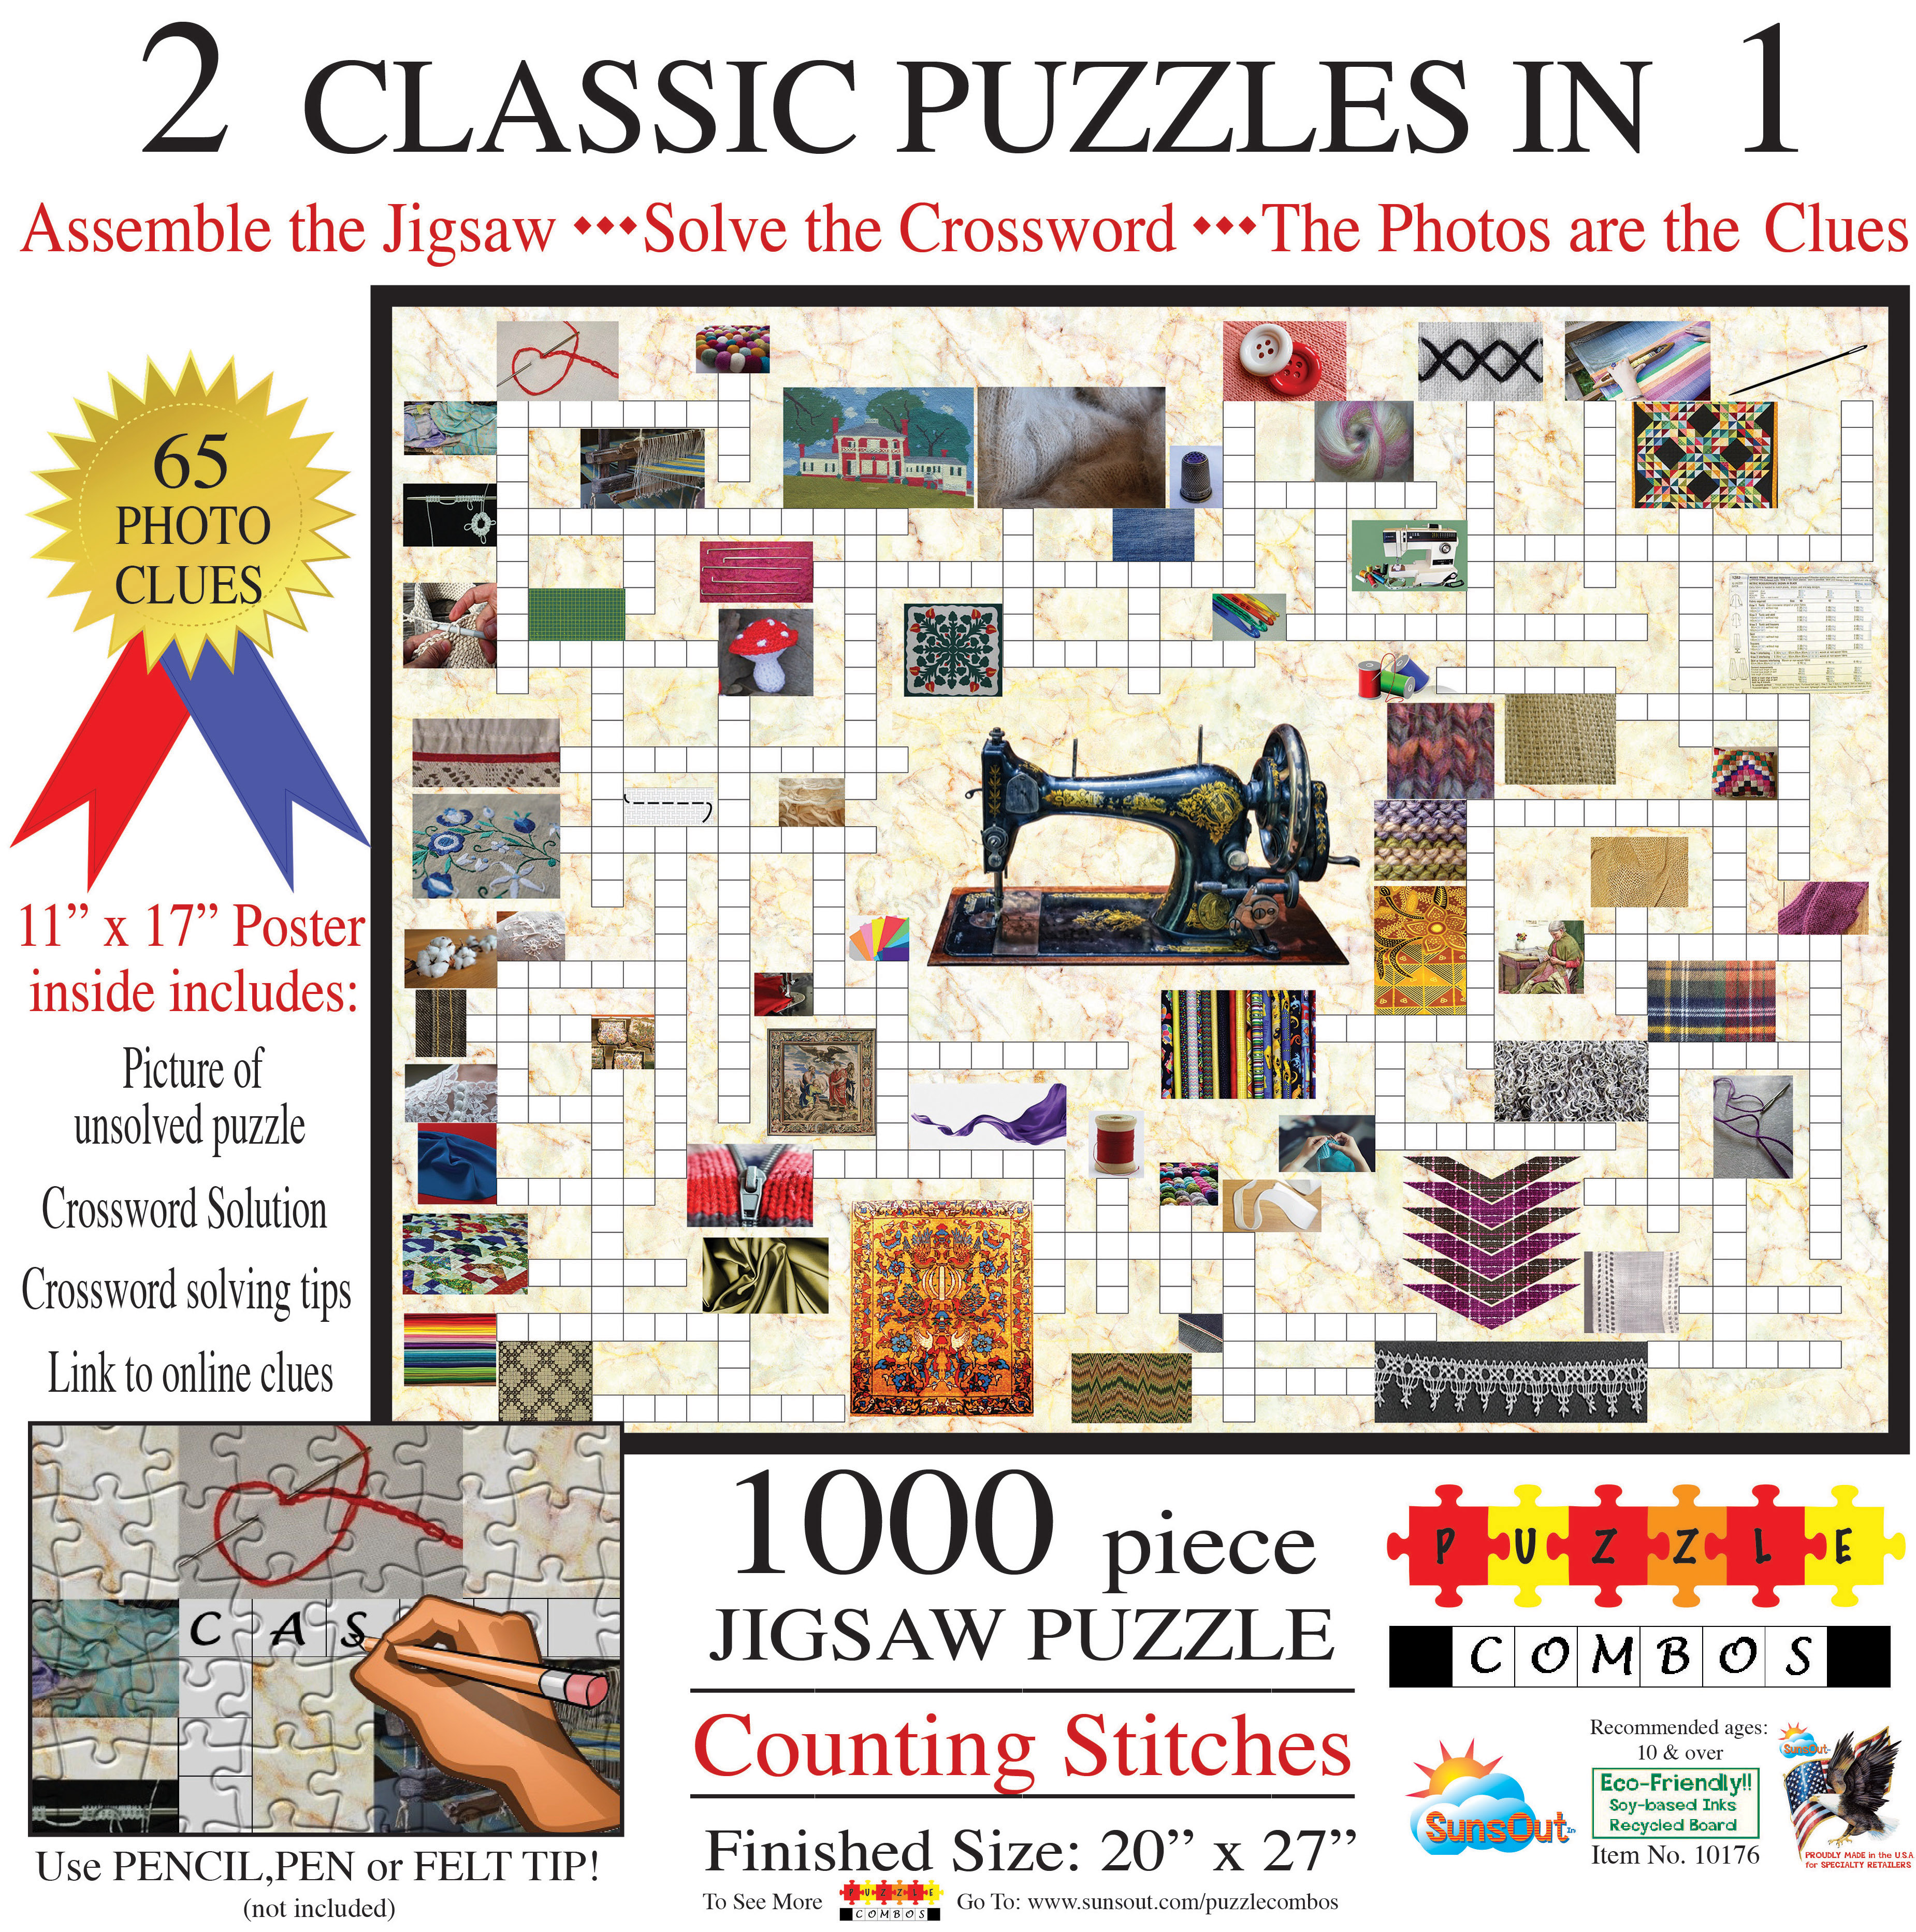 irv brechner - puzzle combo: counting stitches